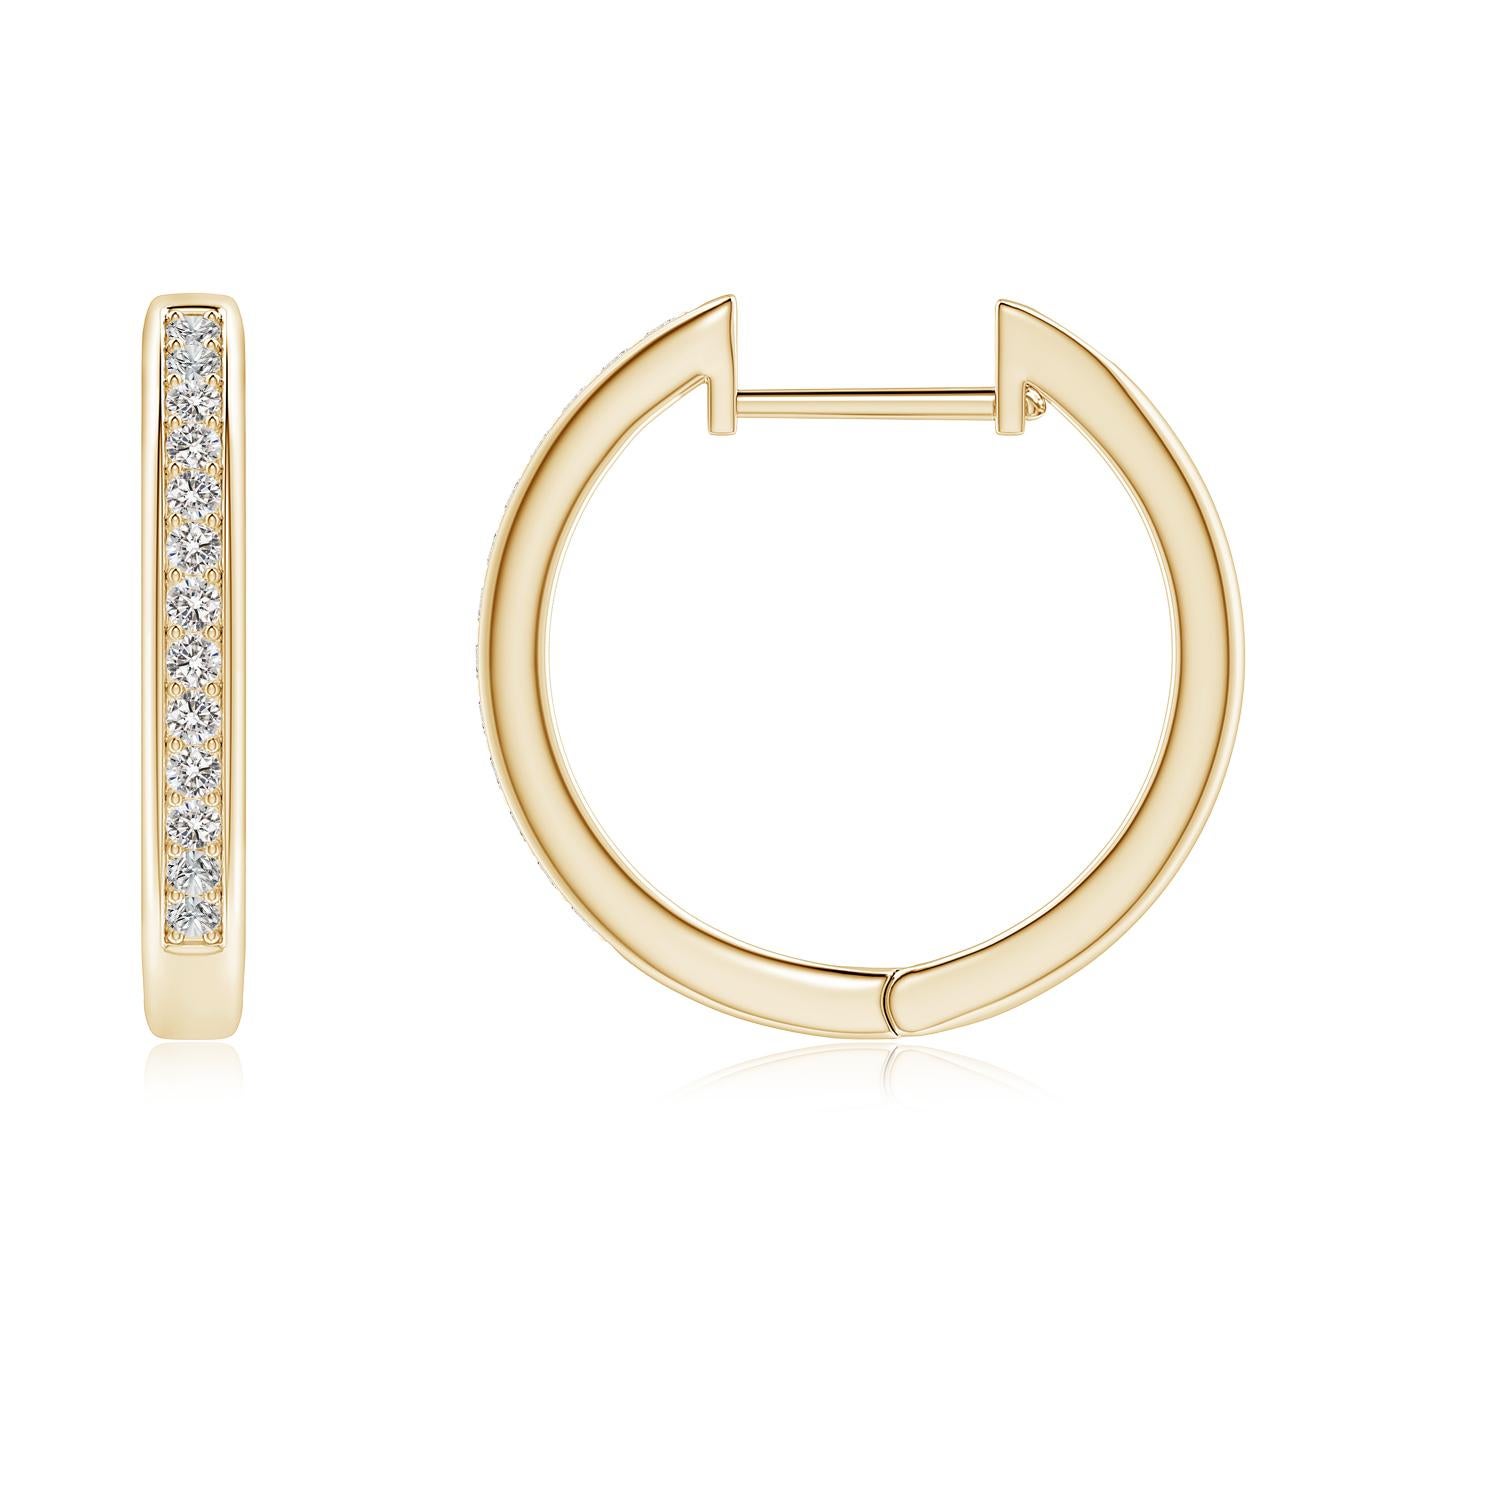 Round Cut Natural Diamond Hoop Earrings in 14K Yellow Gold 0.2cttw Color-I-J Clarity-I1-I2 For Sale